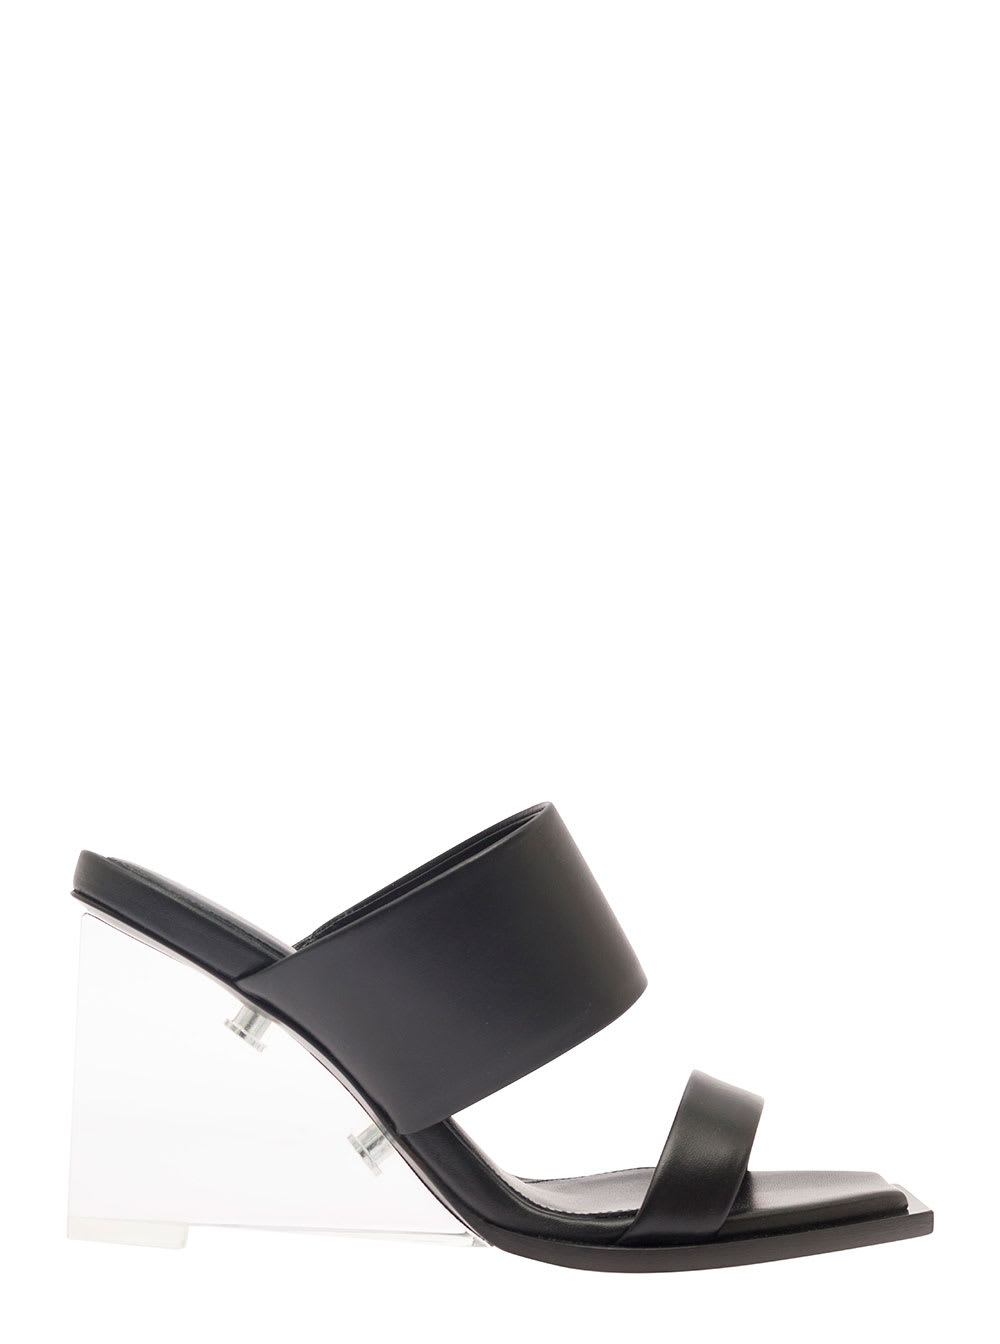 Alexander Mcqueen Black Wedge With Double Strap And Trasparent Plexiglass Heel In Smooth Leather Woman